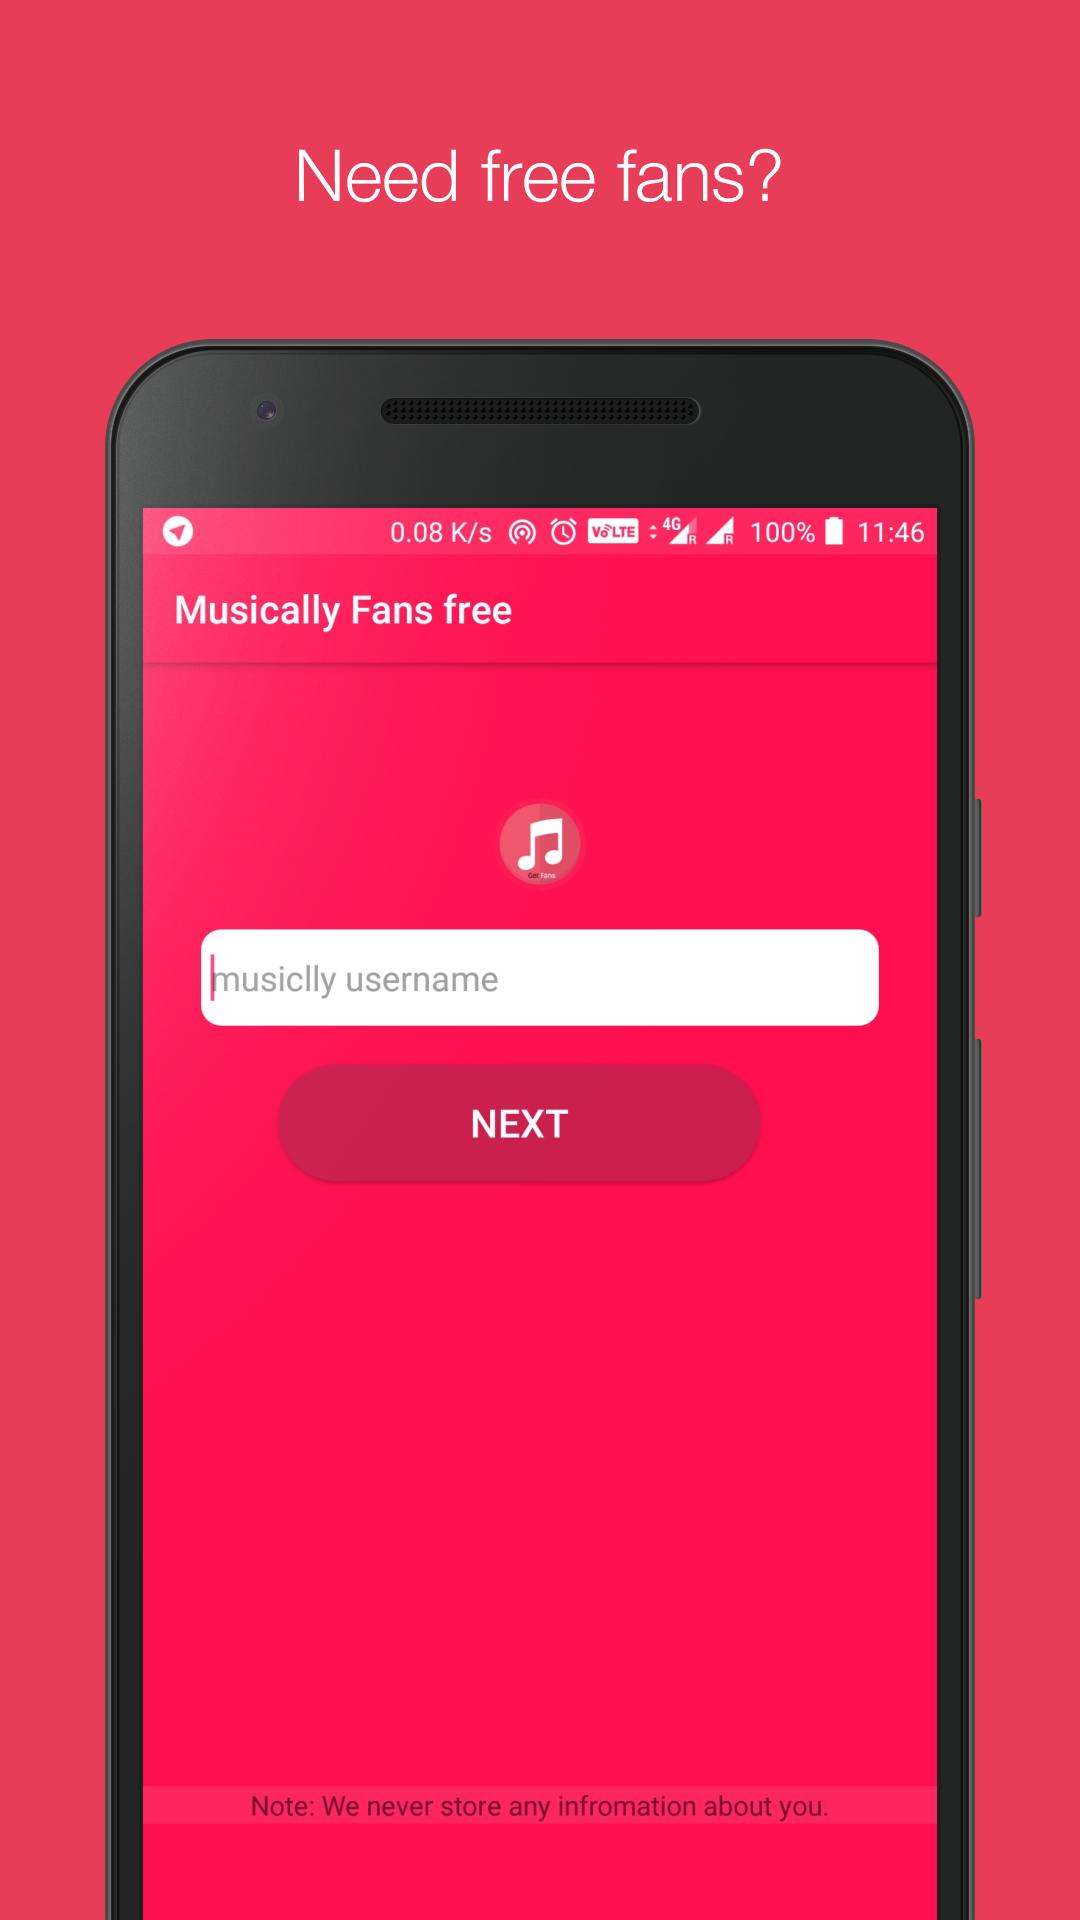 Musically fans free without downloading apps